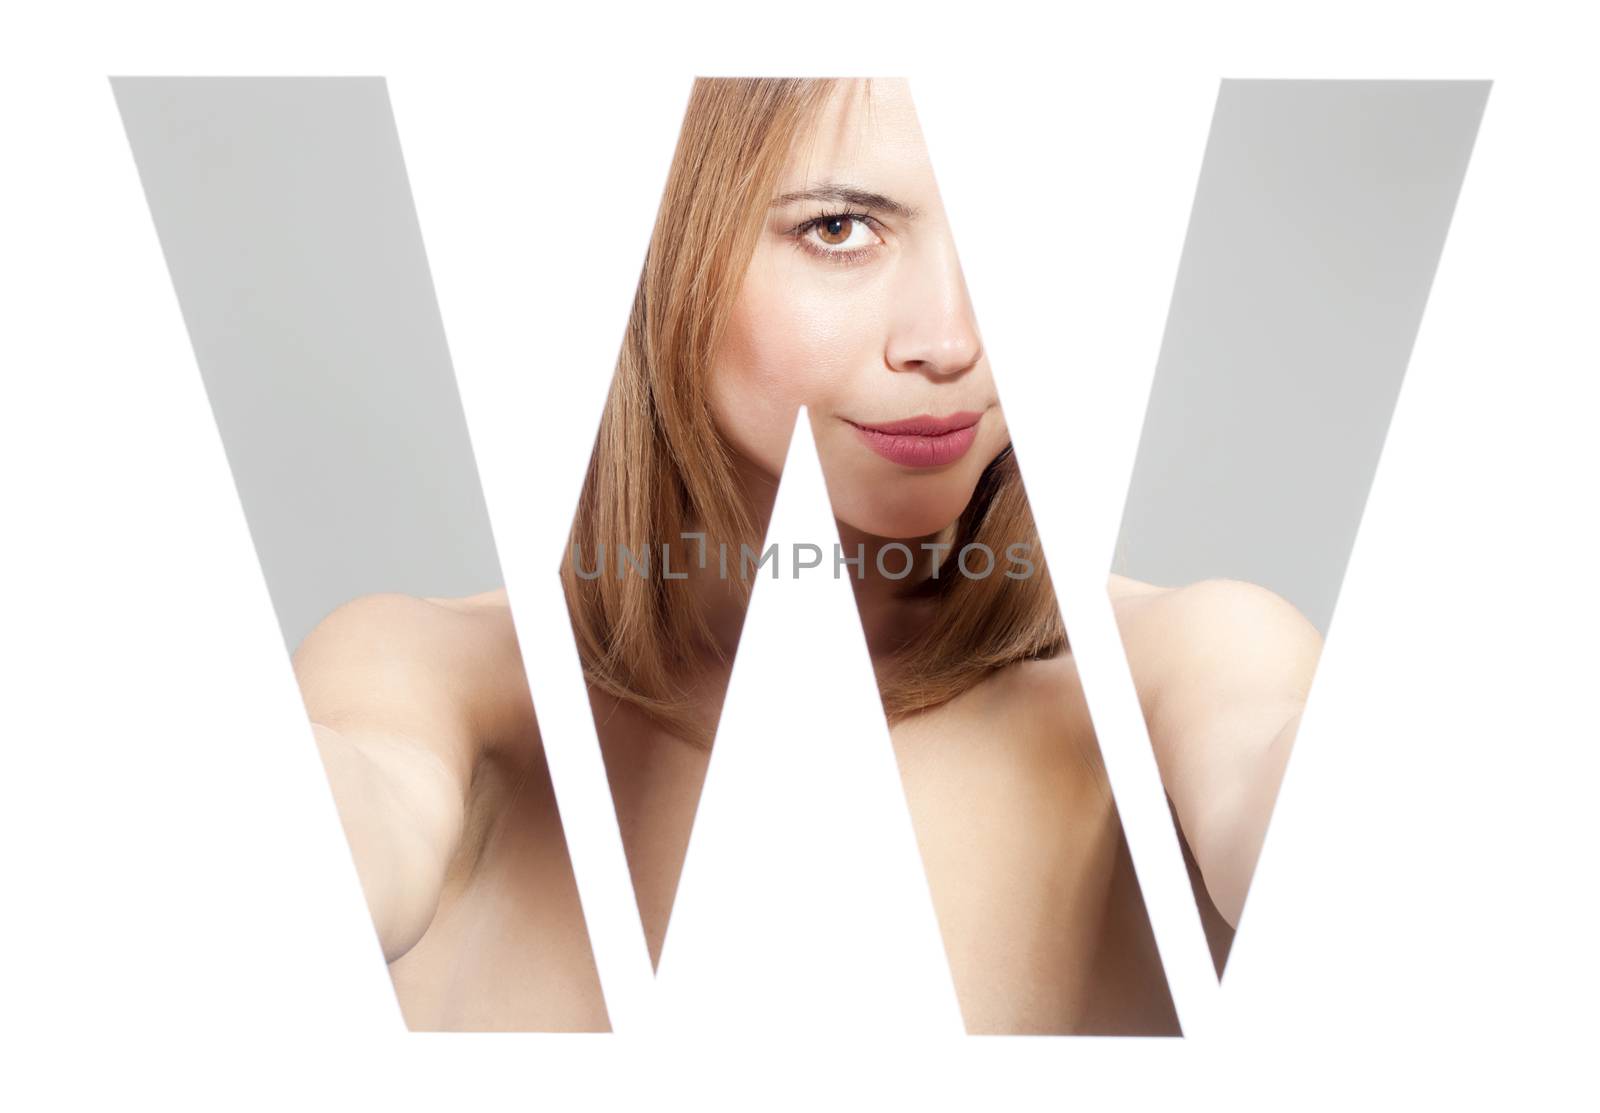 girl portrait behind the letter "W"